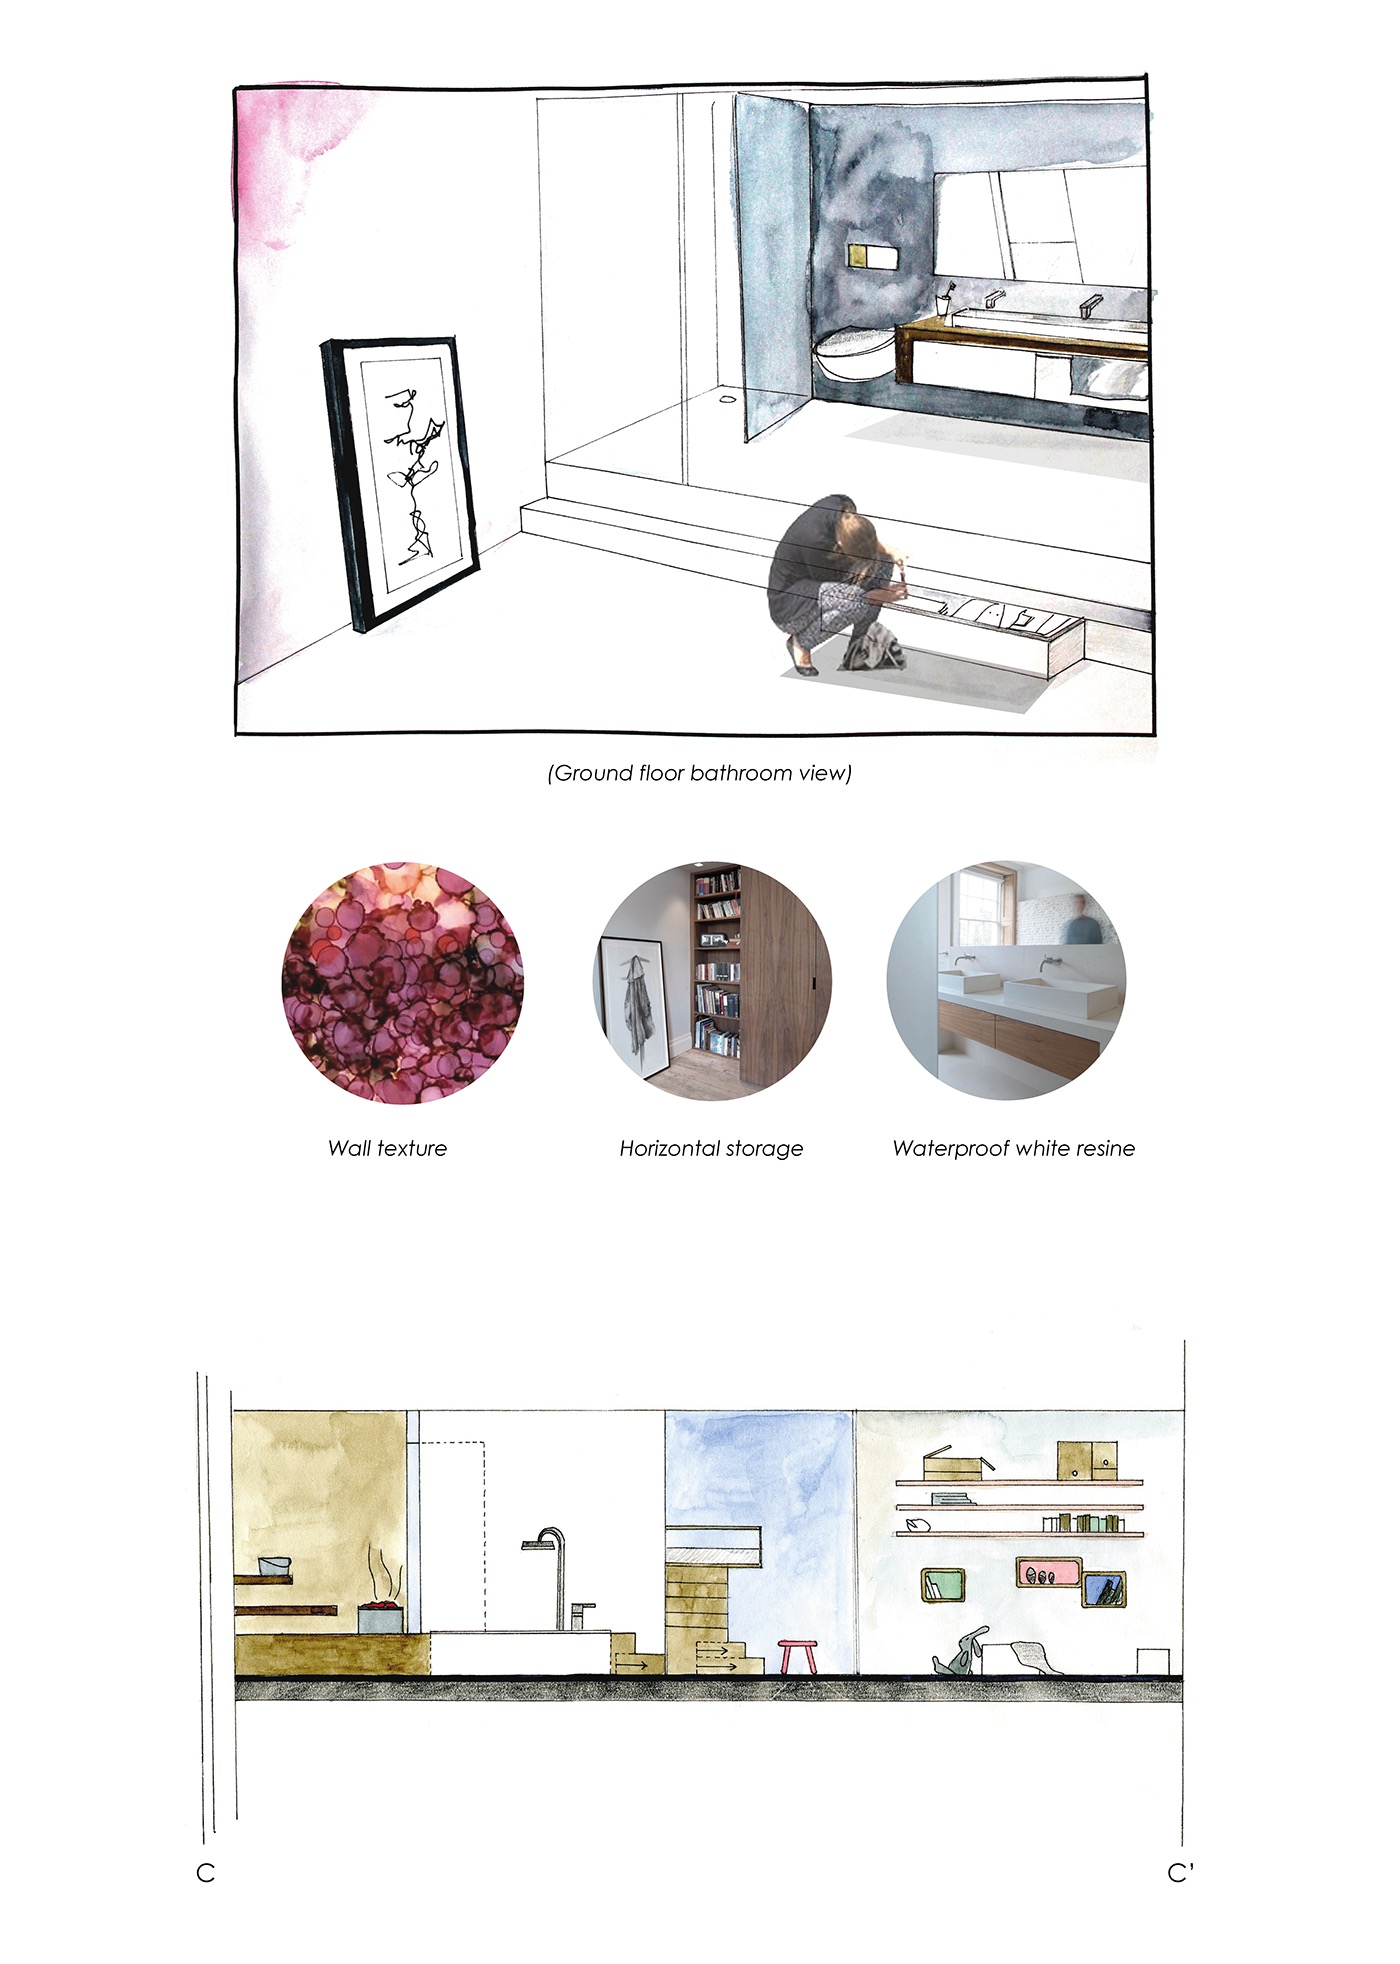 Level apartment finland helsinki pastel colors couple stairs handmade drawing bathroom bedroom mock-up lighting aquarelle water ink home